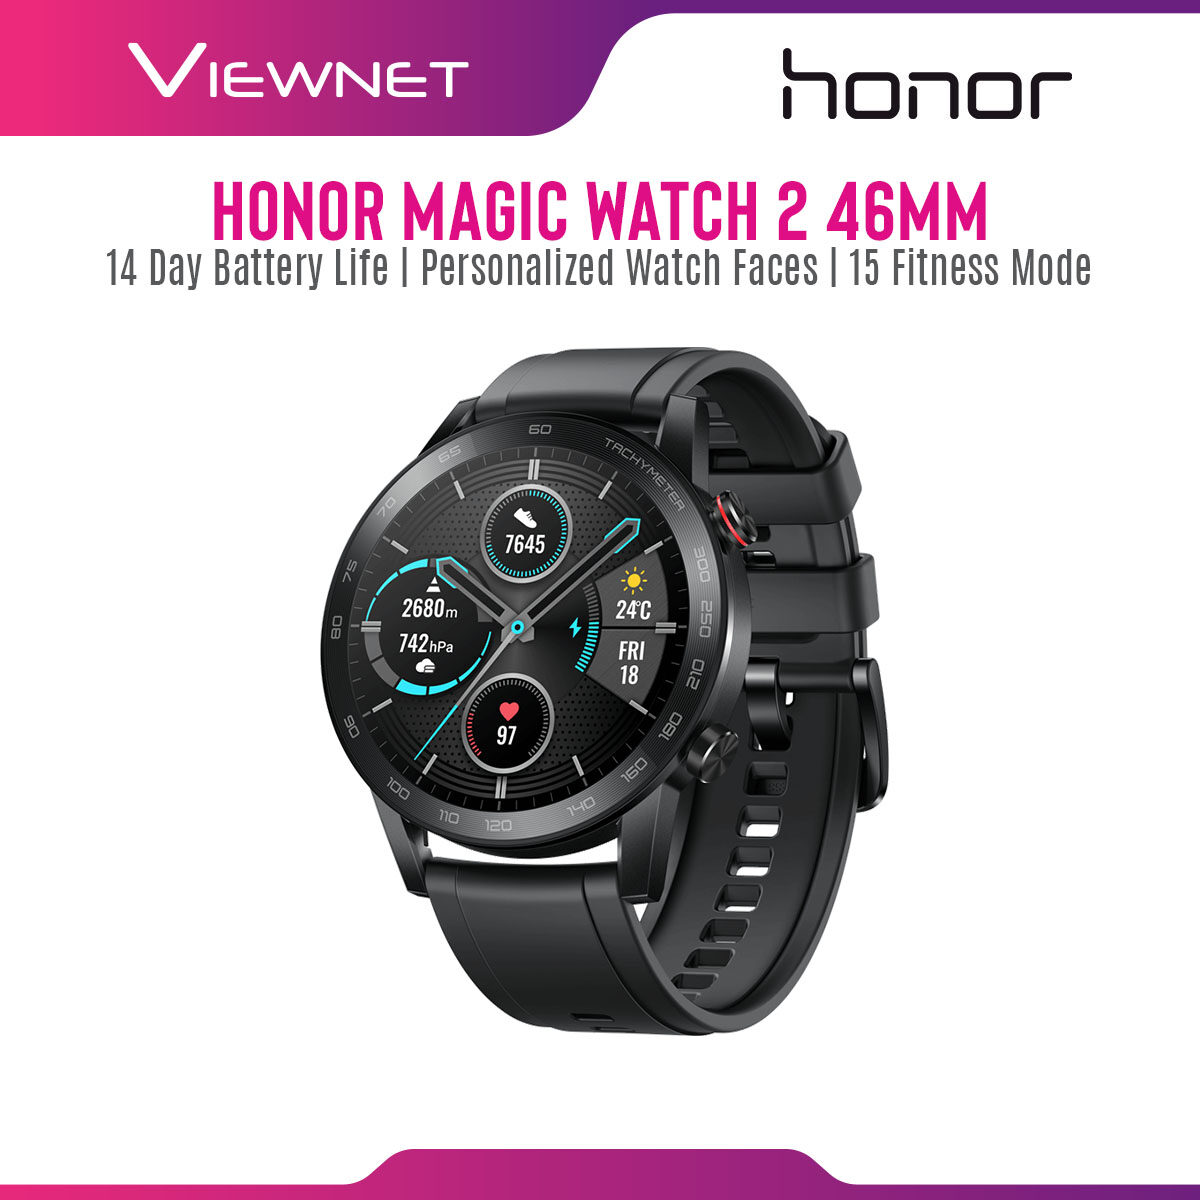 Honor Magic Watch 2 (14-Day Battery Life/Personalized Watch Faces/15 Goal-Based Fitness Modes) Smartwatch with 1 Year Honor Malaysia Warranty